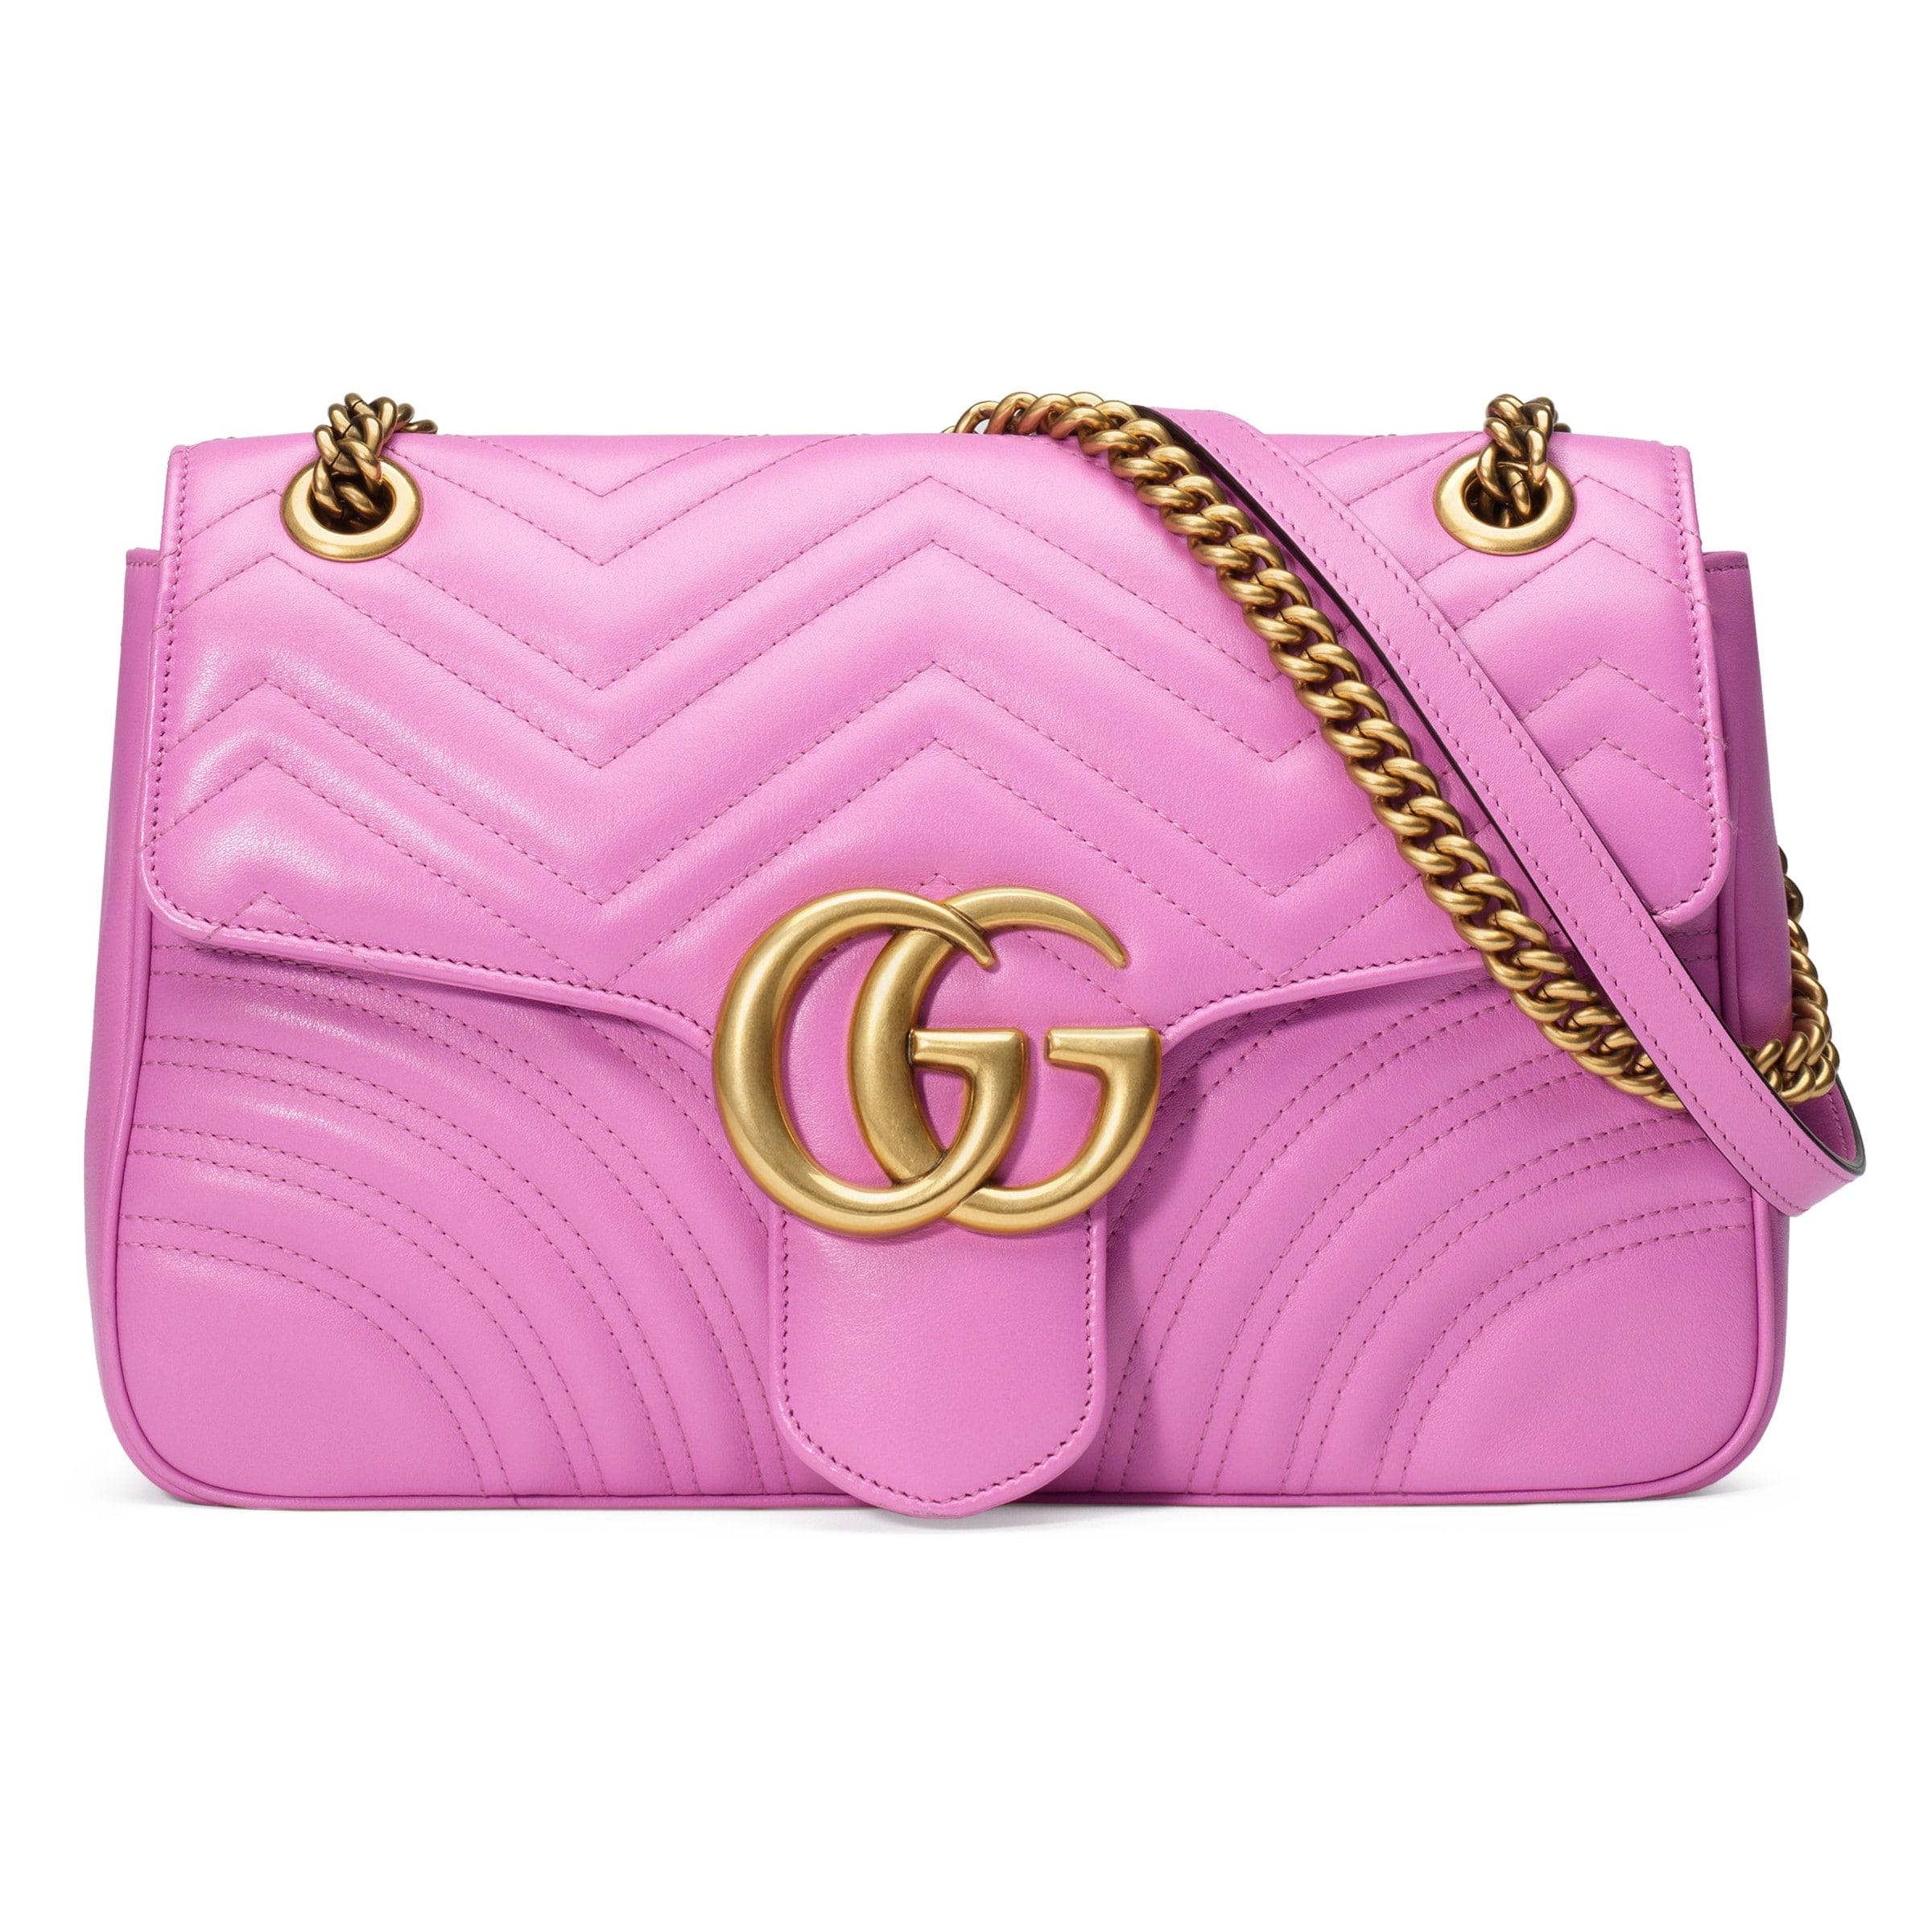 Gucci 2016 Re-edition GG Marmont Bag in Pink | Lyst